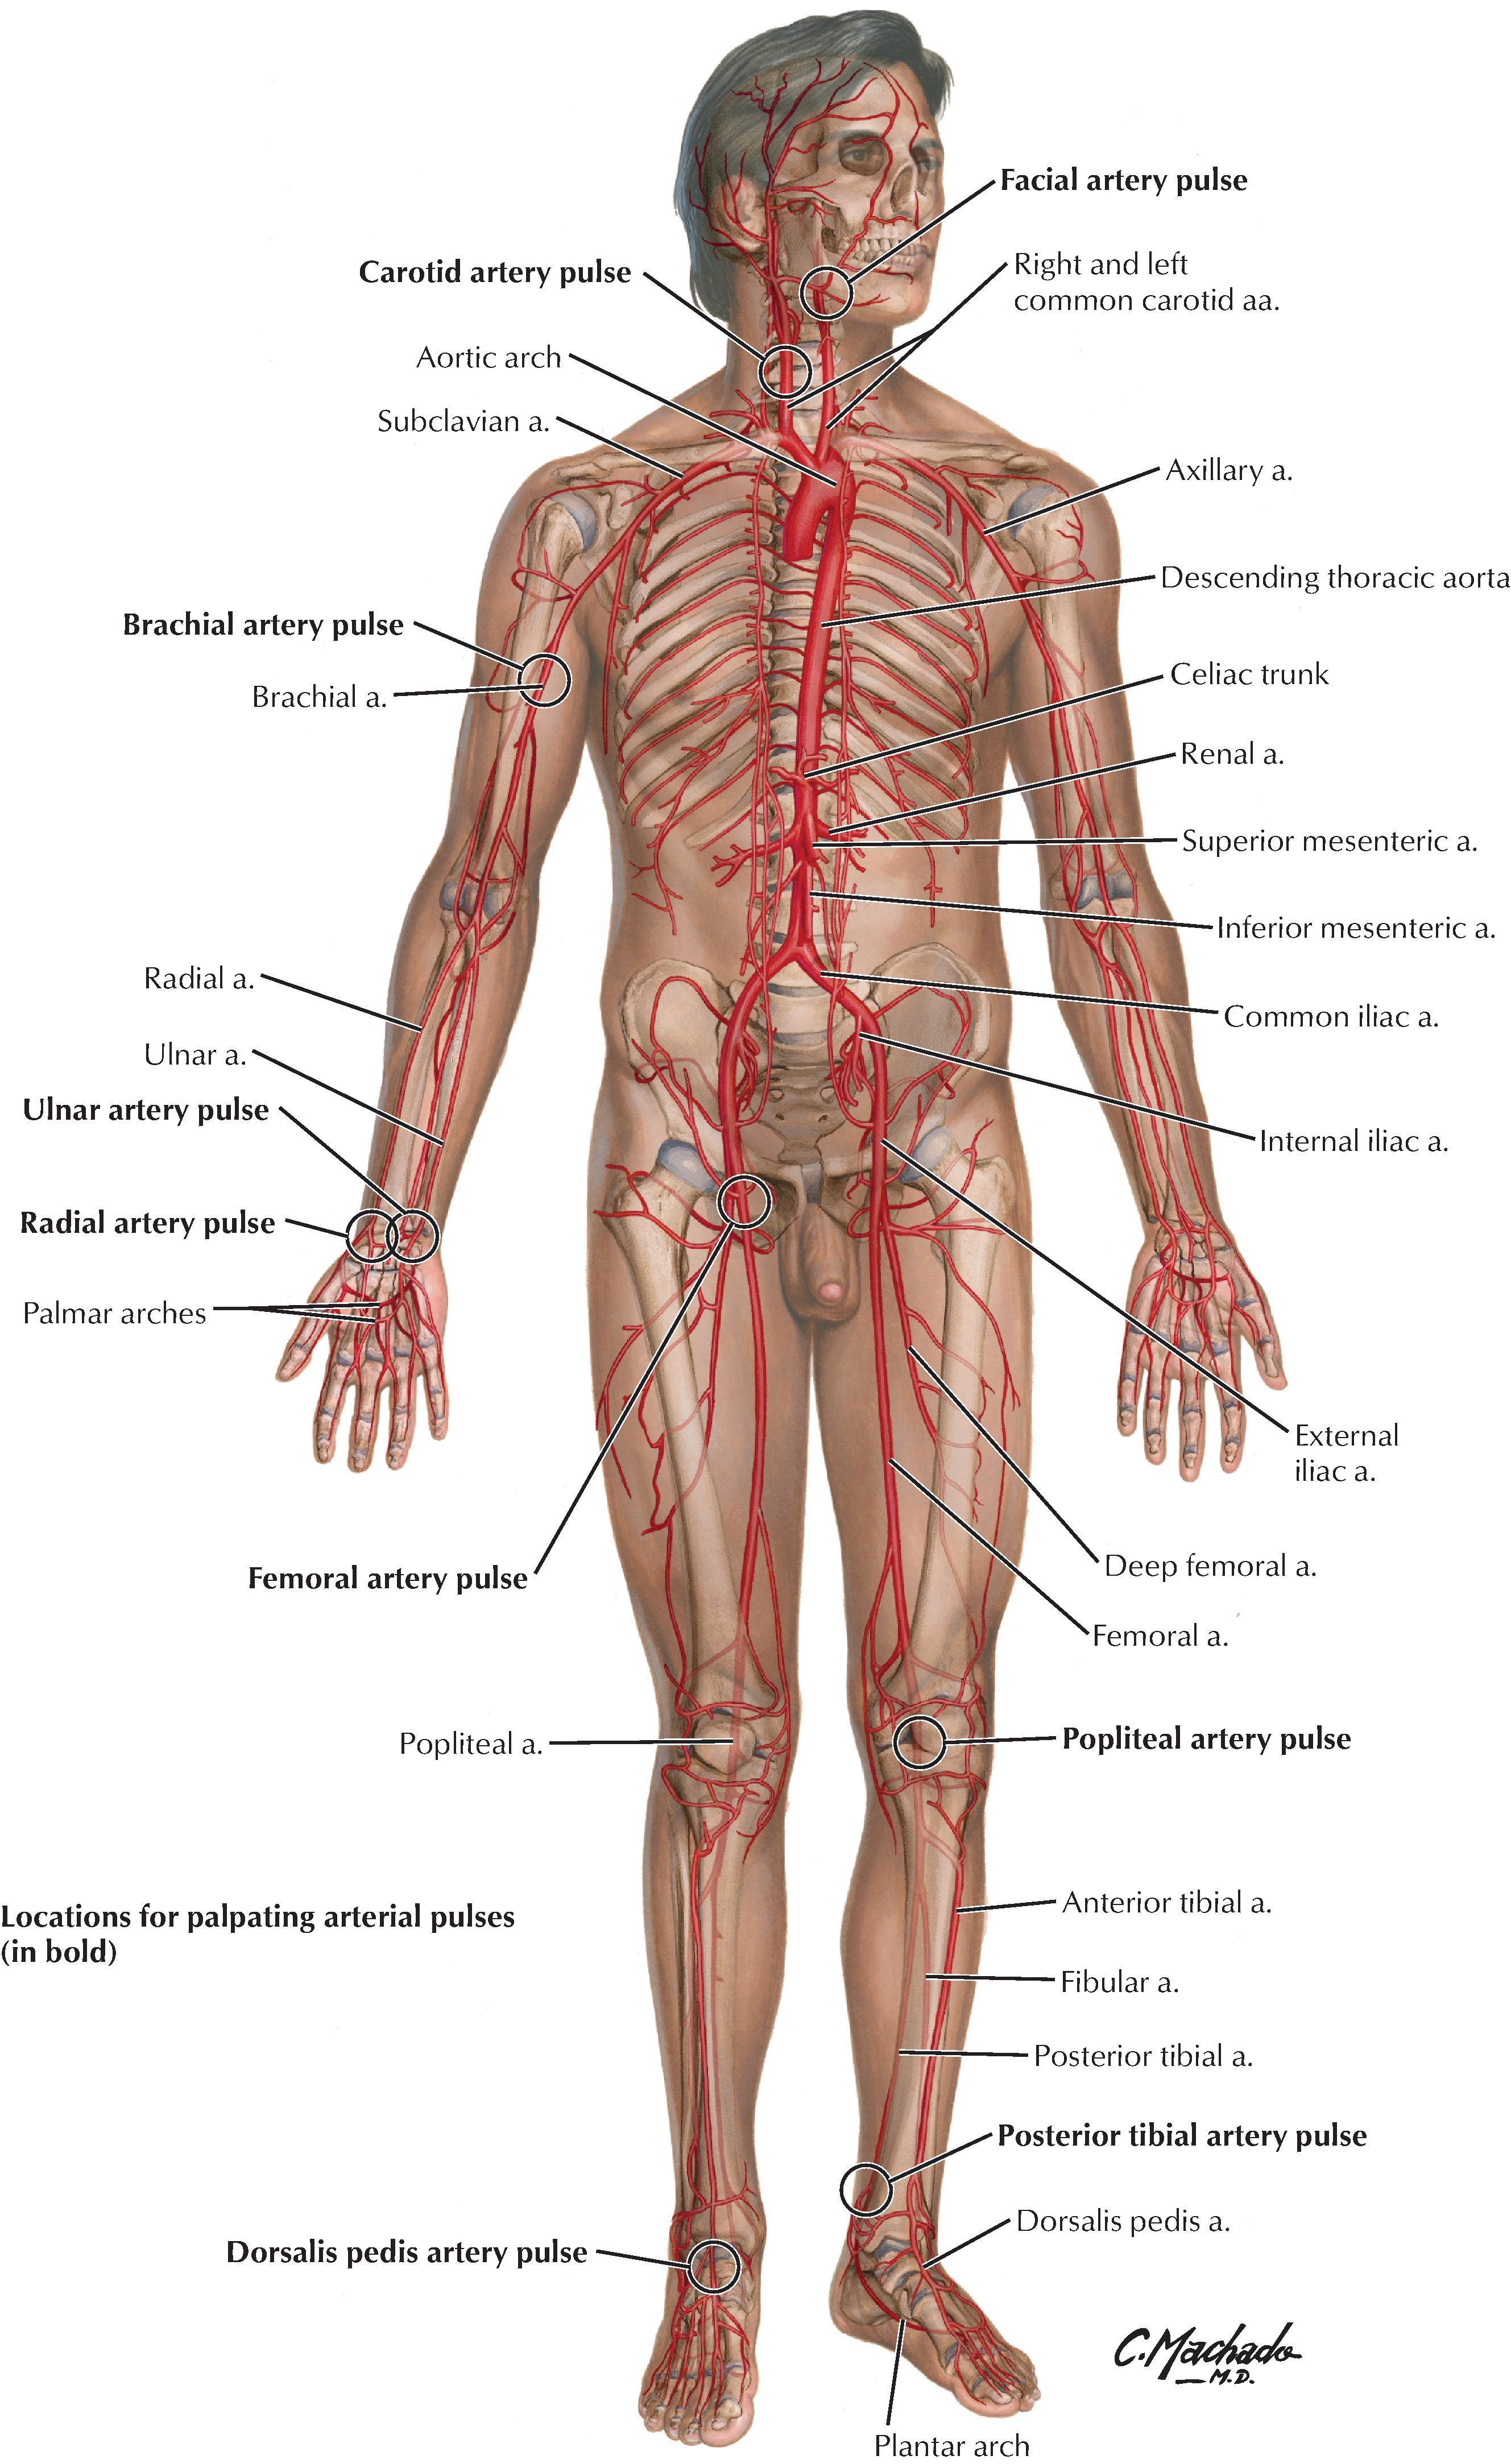 FIGURE 1.13, Major Arteries and Pulse Points.